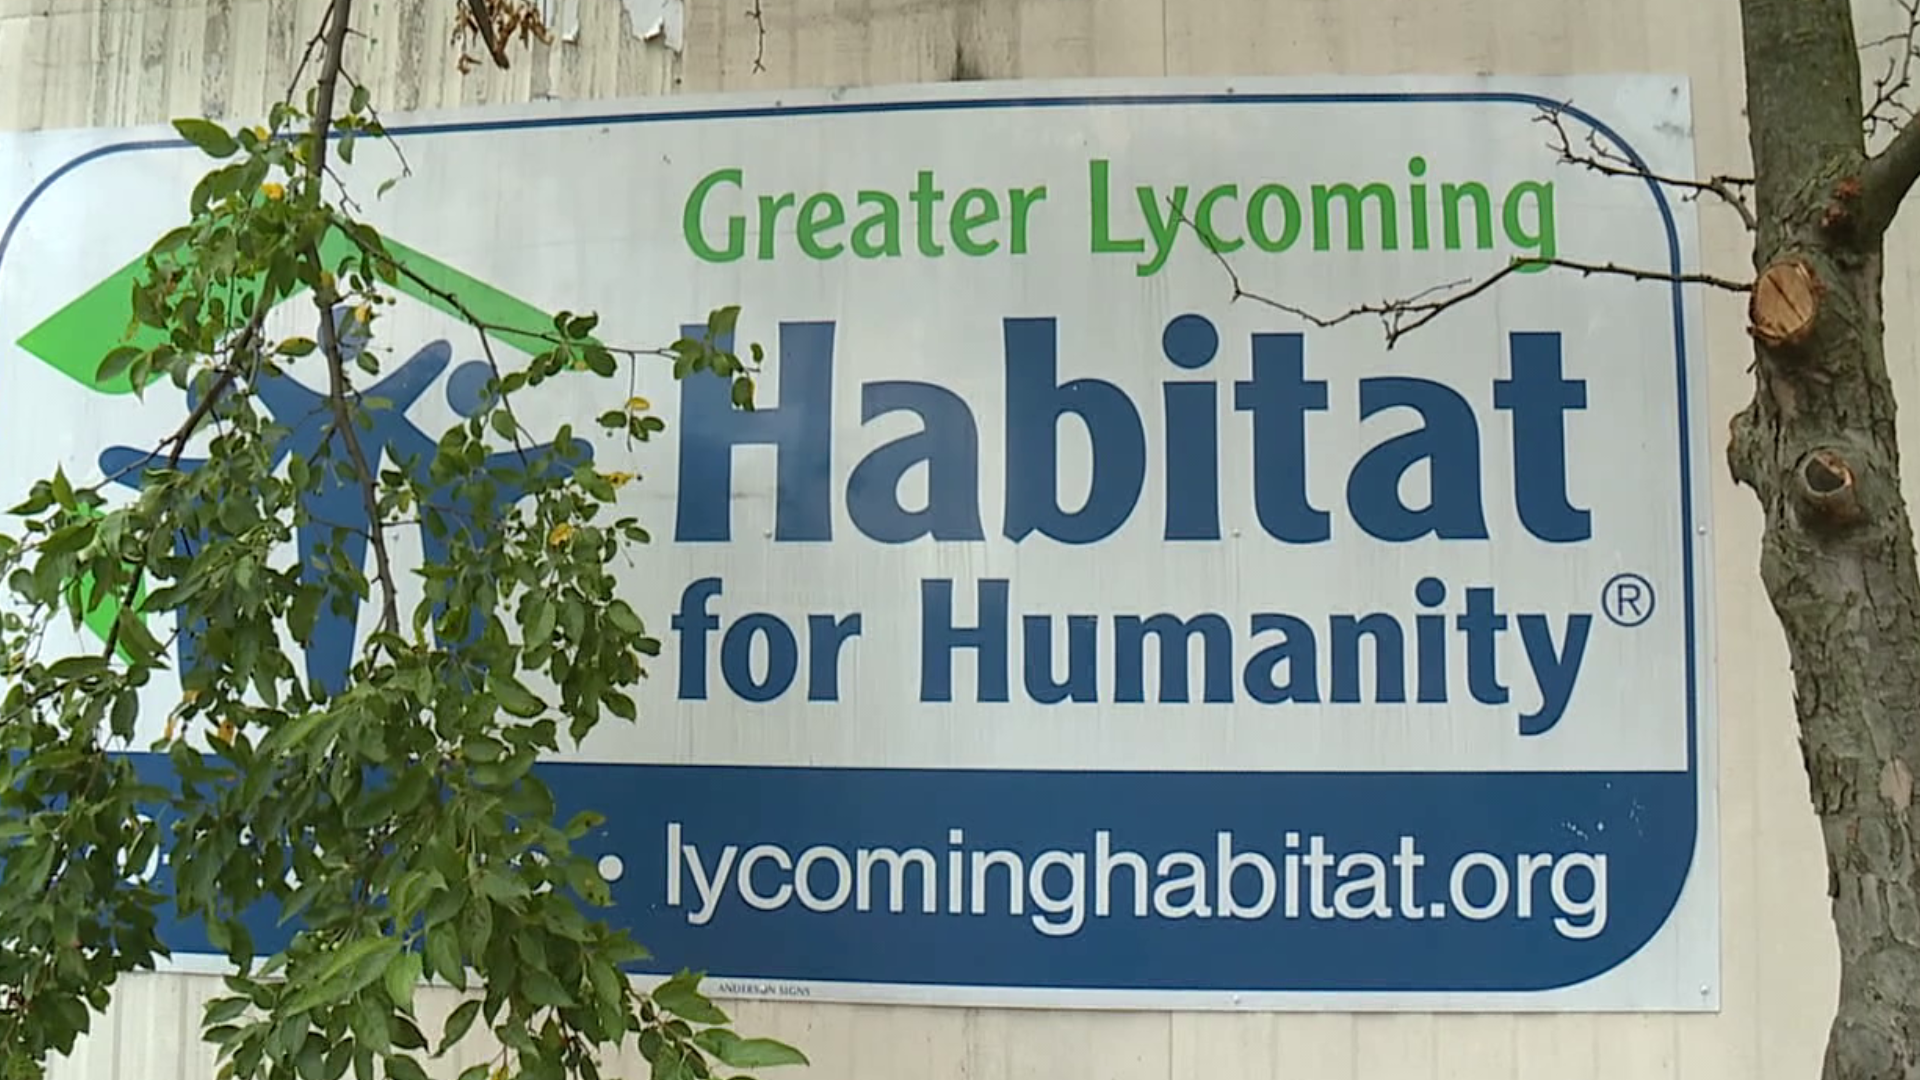 The Greater Lycoming Habitat for Humanity is building its 54th home in the organization's 30th year.